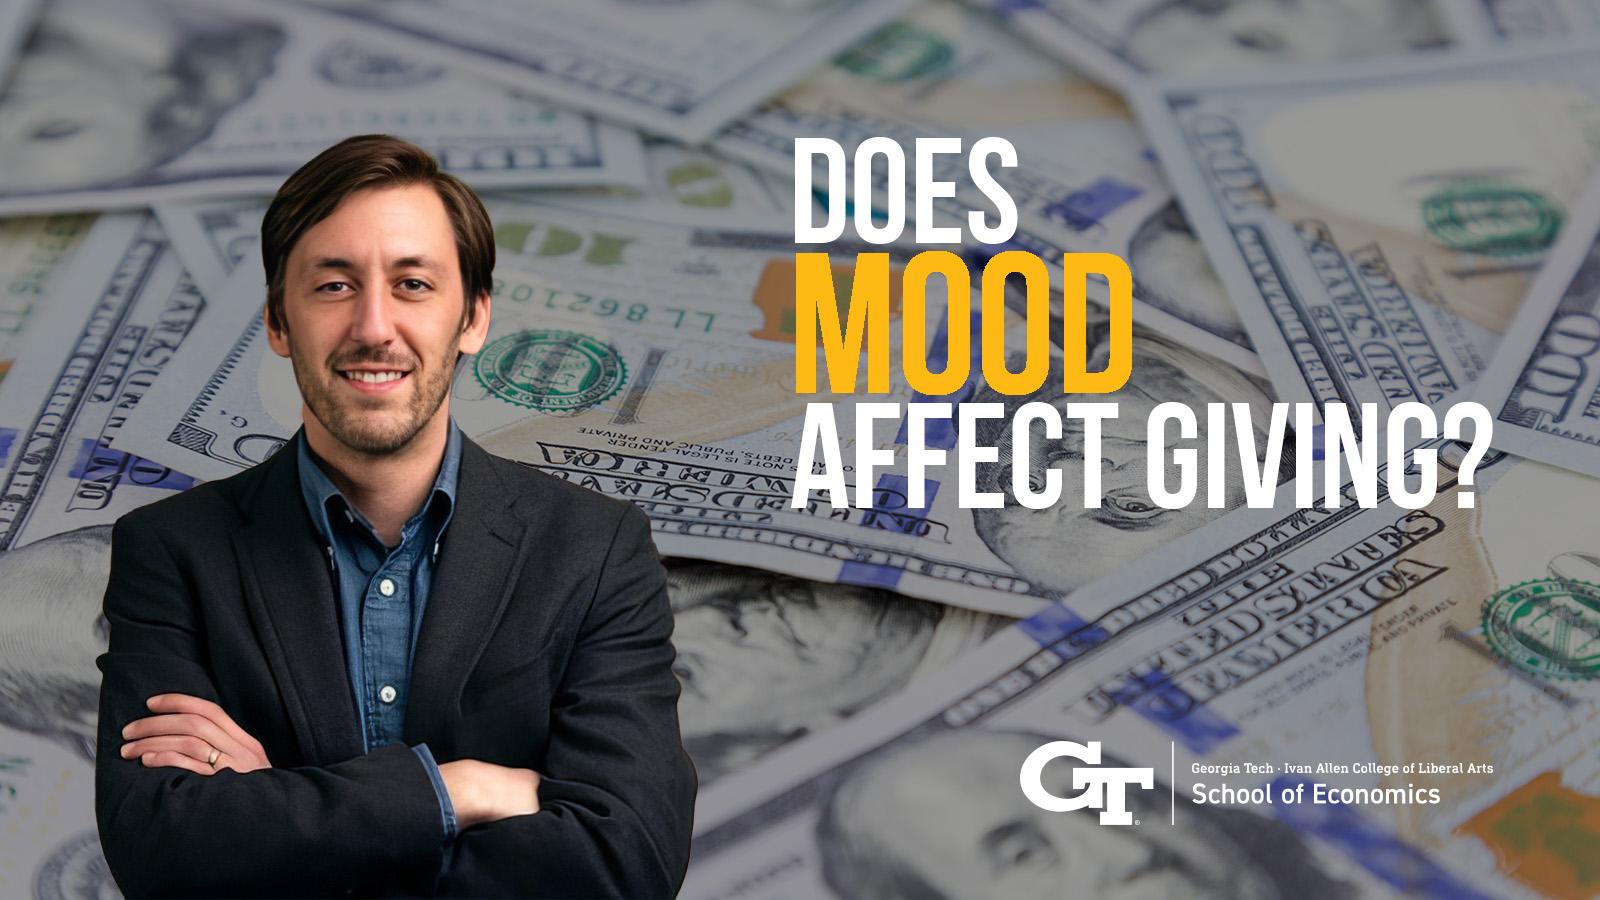 Photo illustration of a man standing with his arms folded against a backdrop of money and the words 'Does Mood Affect Giving?'